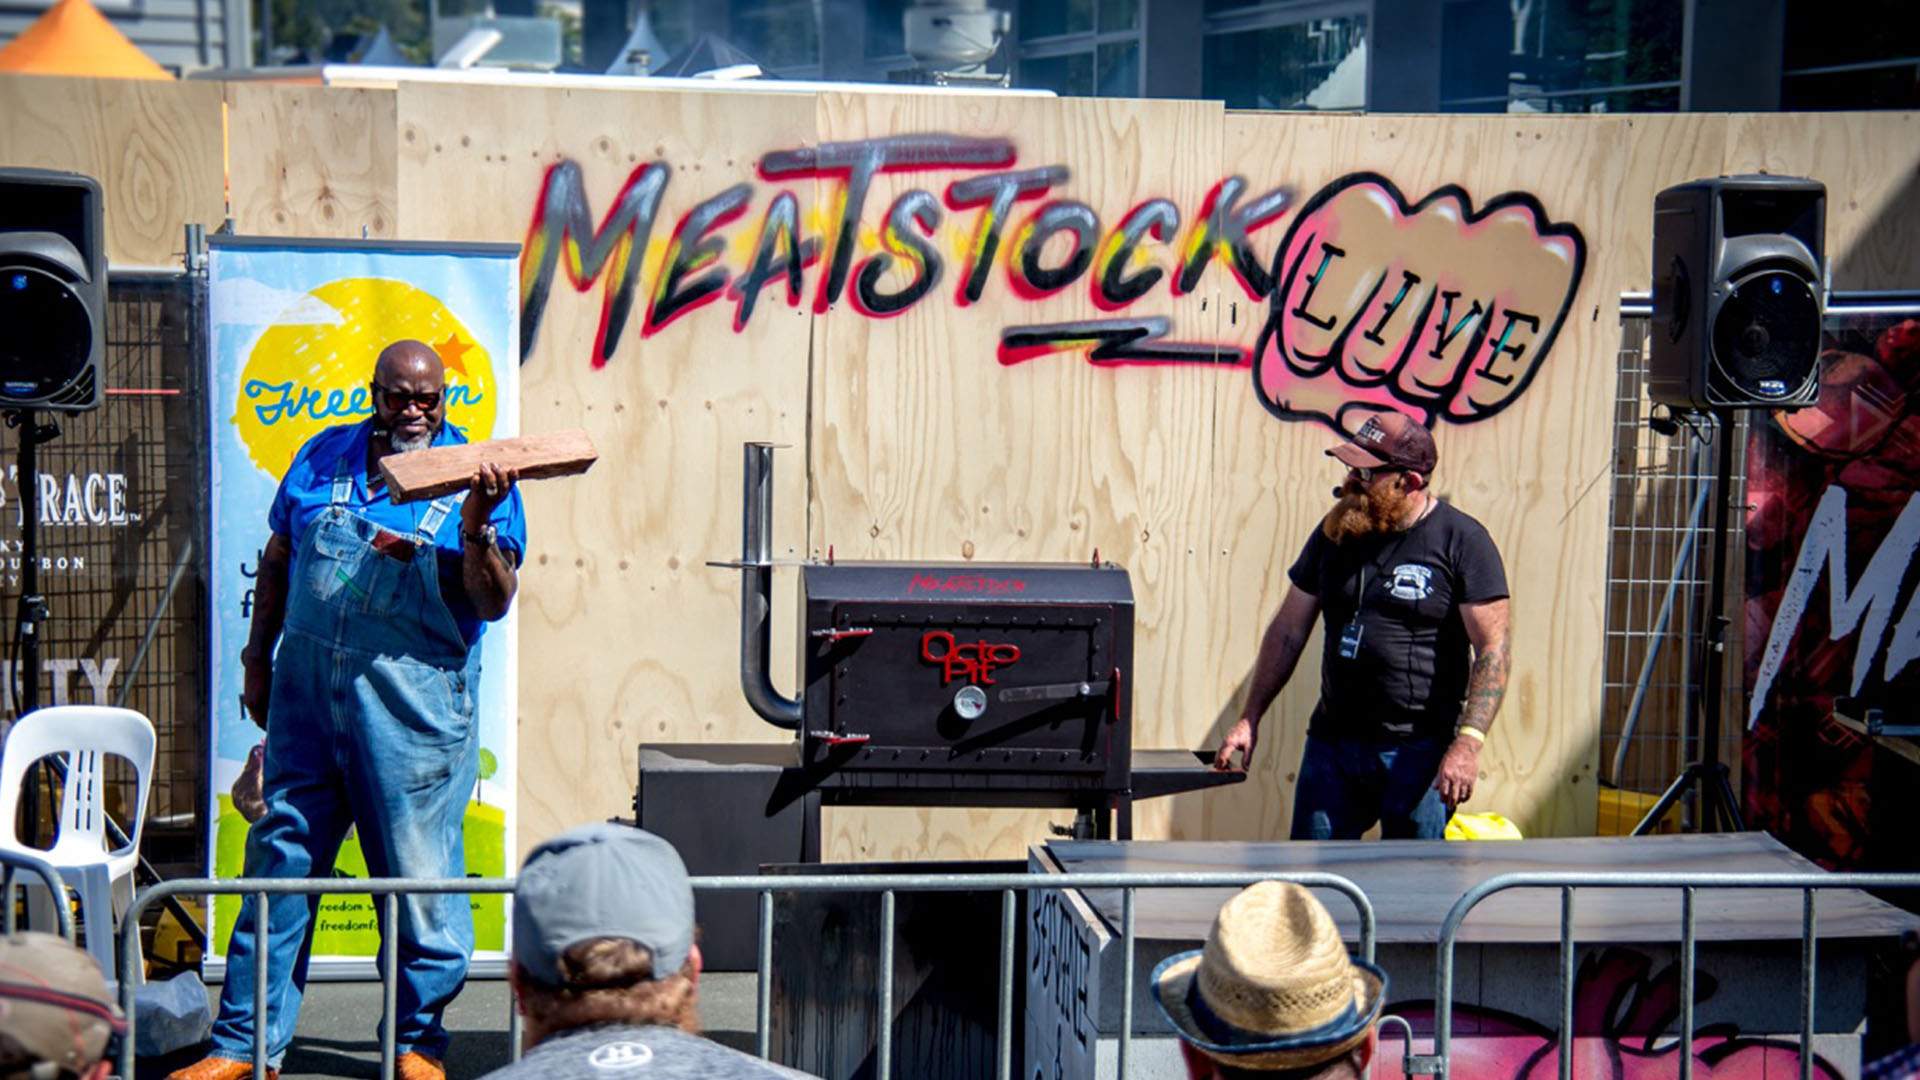 Two-Day Meat Festival Meatstock Is Heading Back for Its Third Year